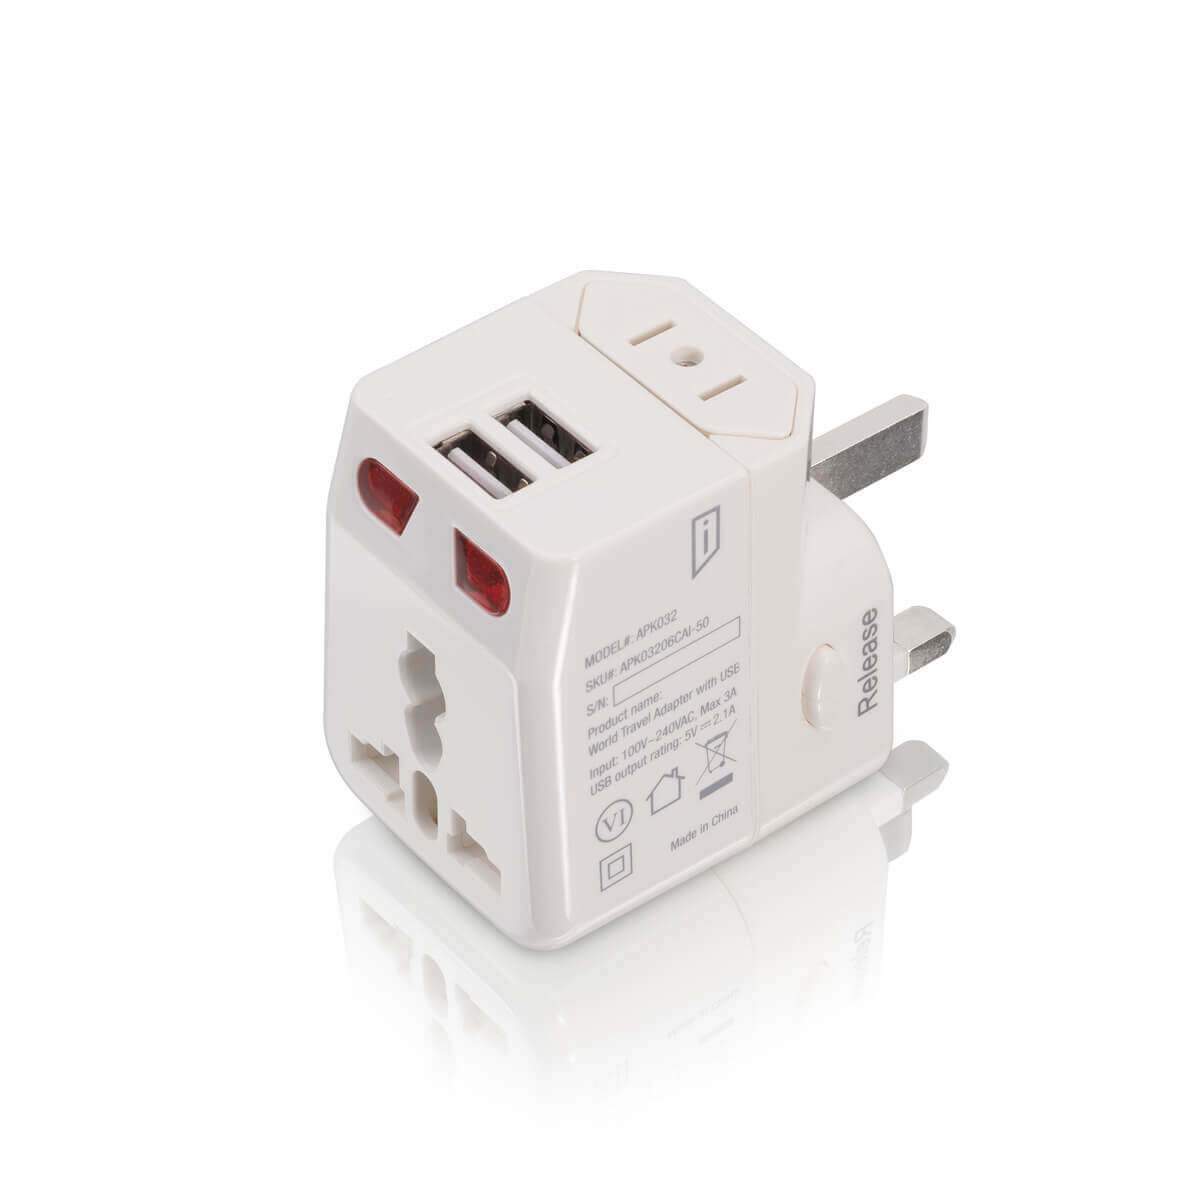 iStore World Travel Adapter with Dual USB Charging Ports - APK03206CAI